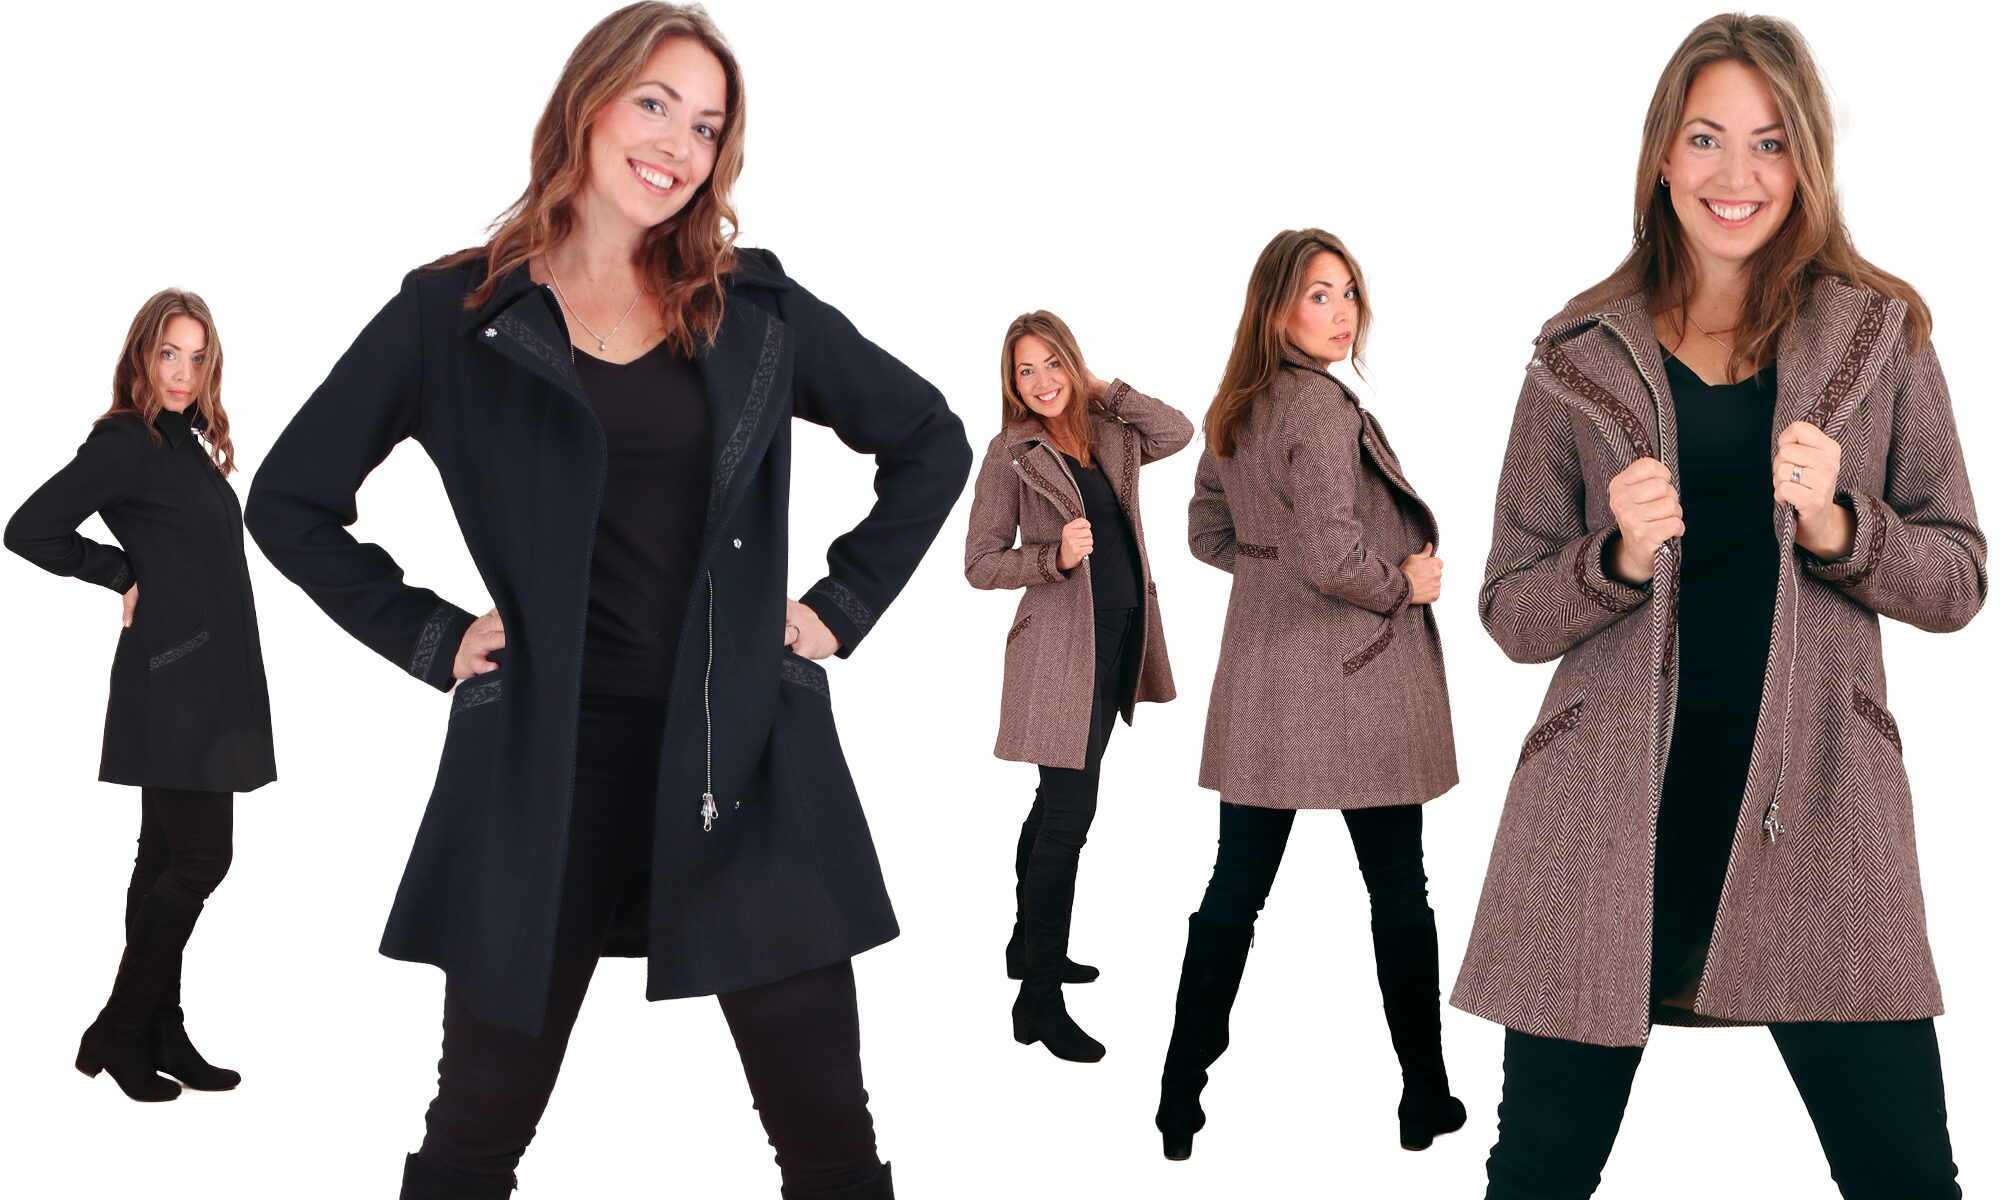 Buy black wool coat with reflective details, buy brown herringbone coat with reflective with embroidery.